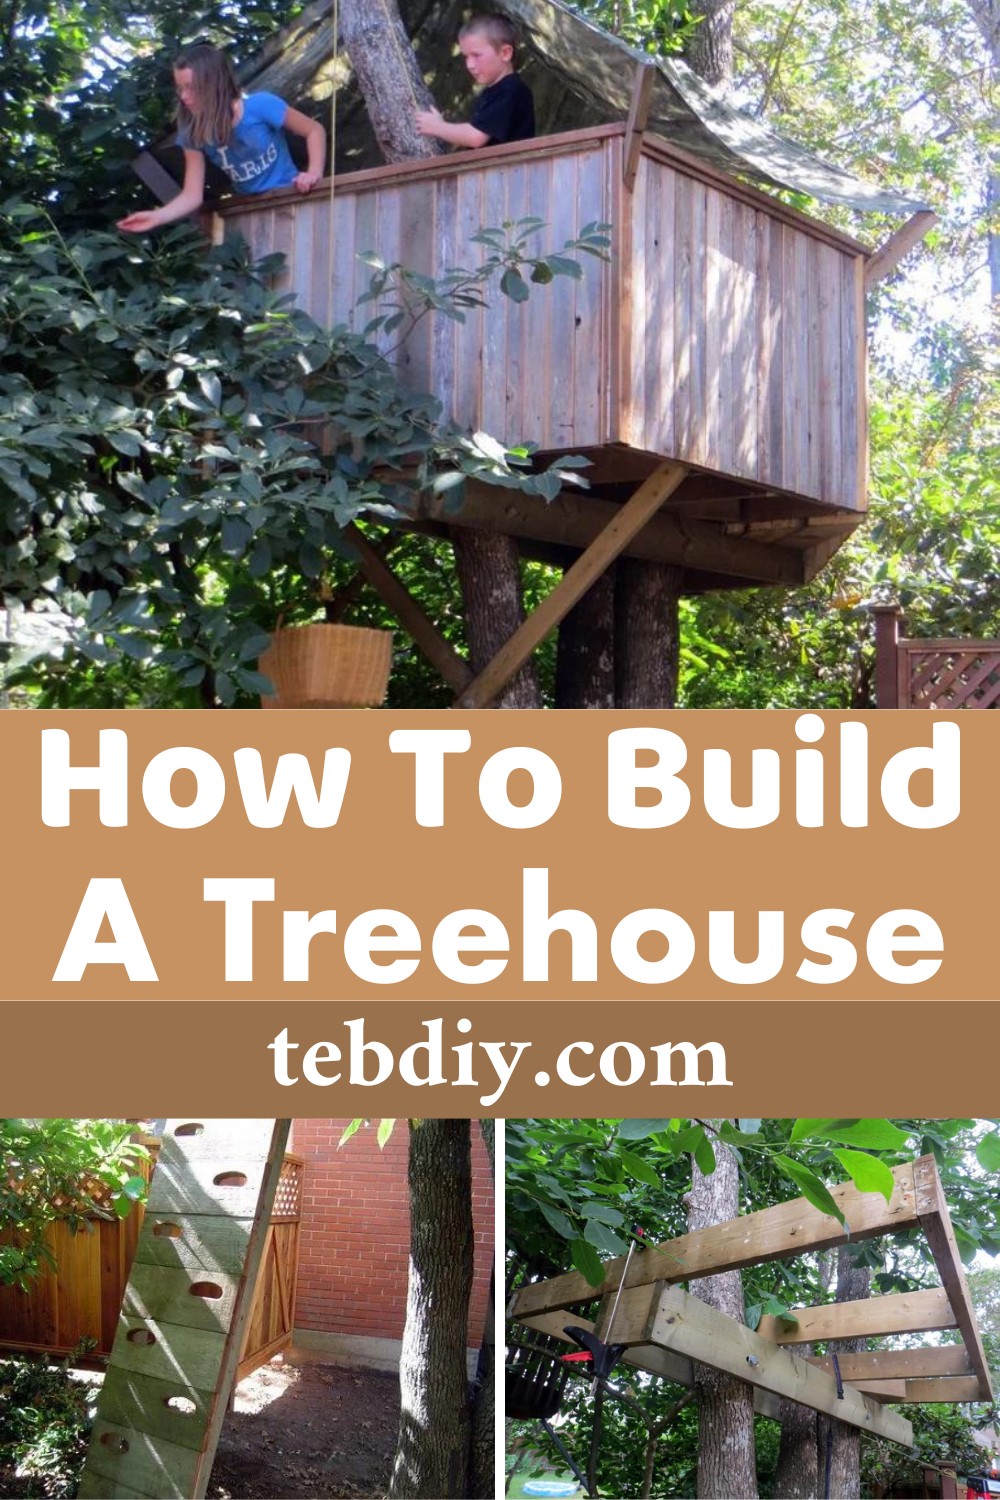 How To Build A Treehouse